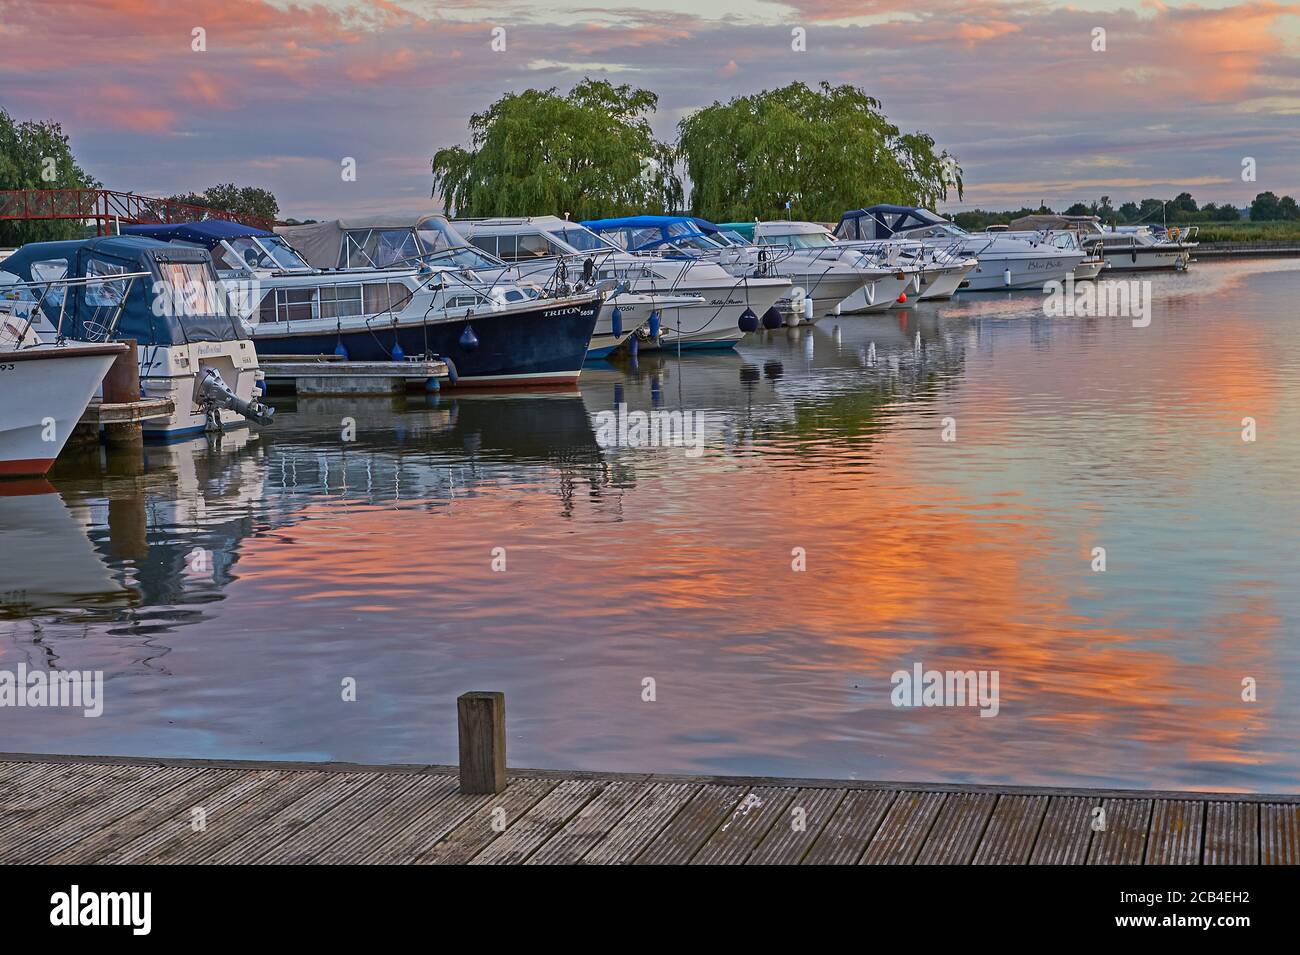 Potter Heigham, Norfolk Broads and boats moored in the marina with a colourful sky reflected in the water. Stock Photo